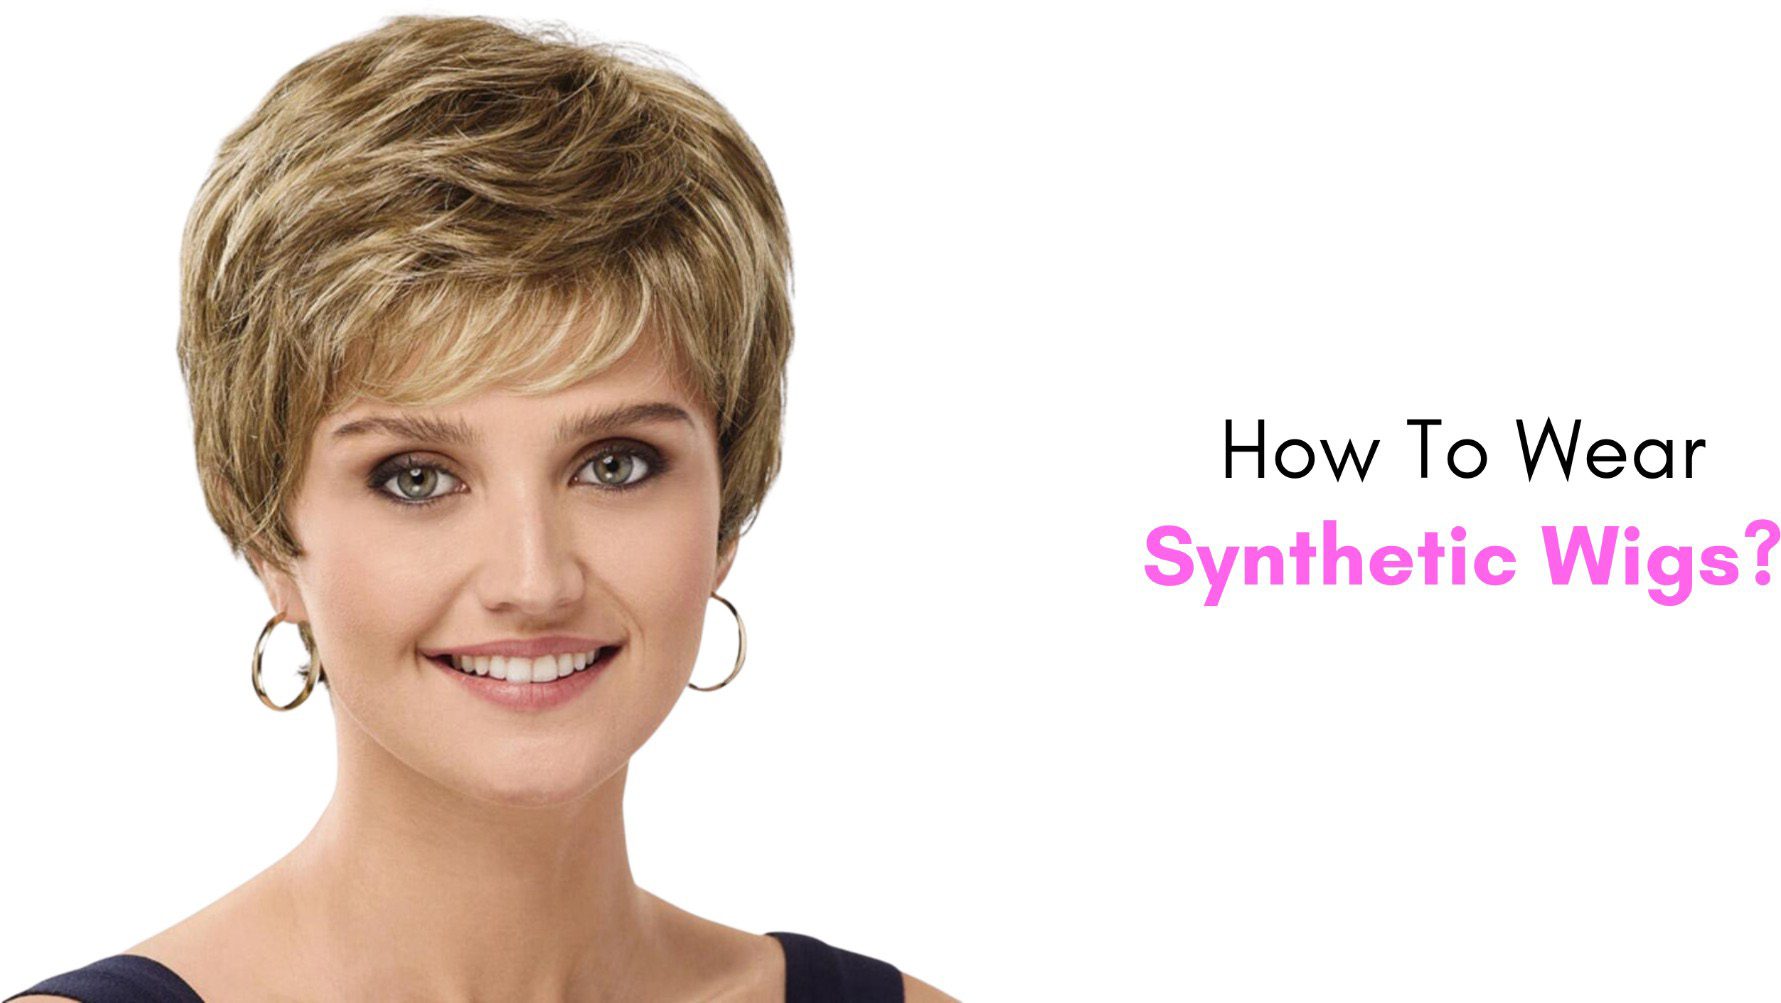 How To Wear Synthetic Wigs?